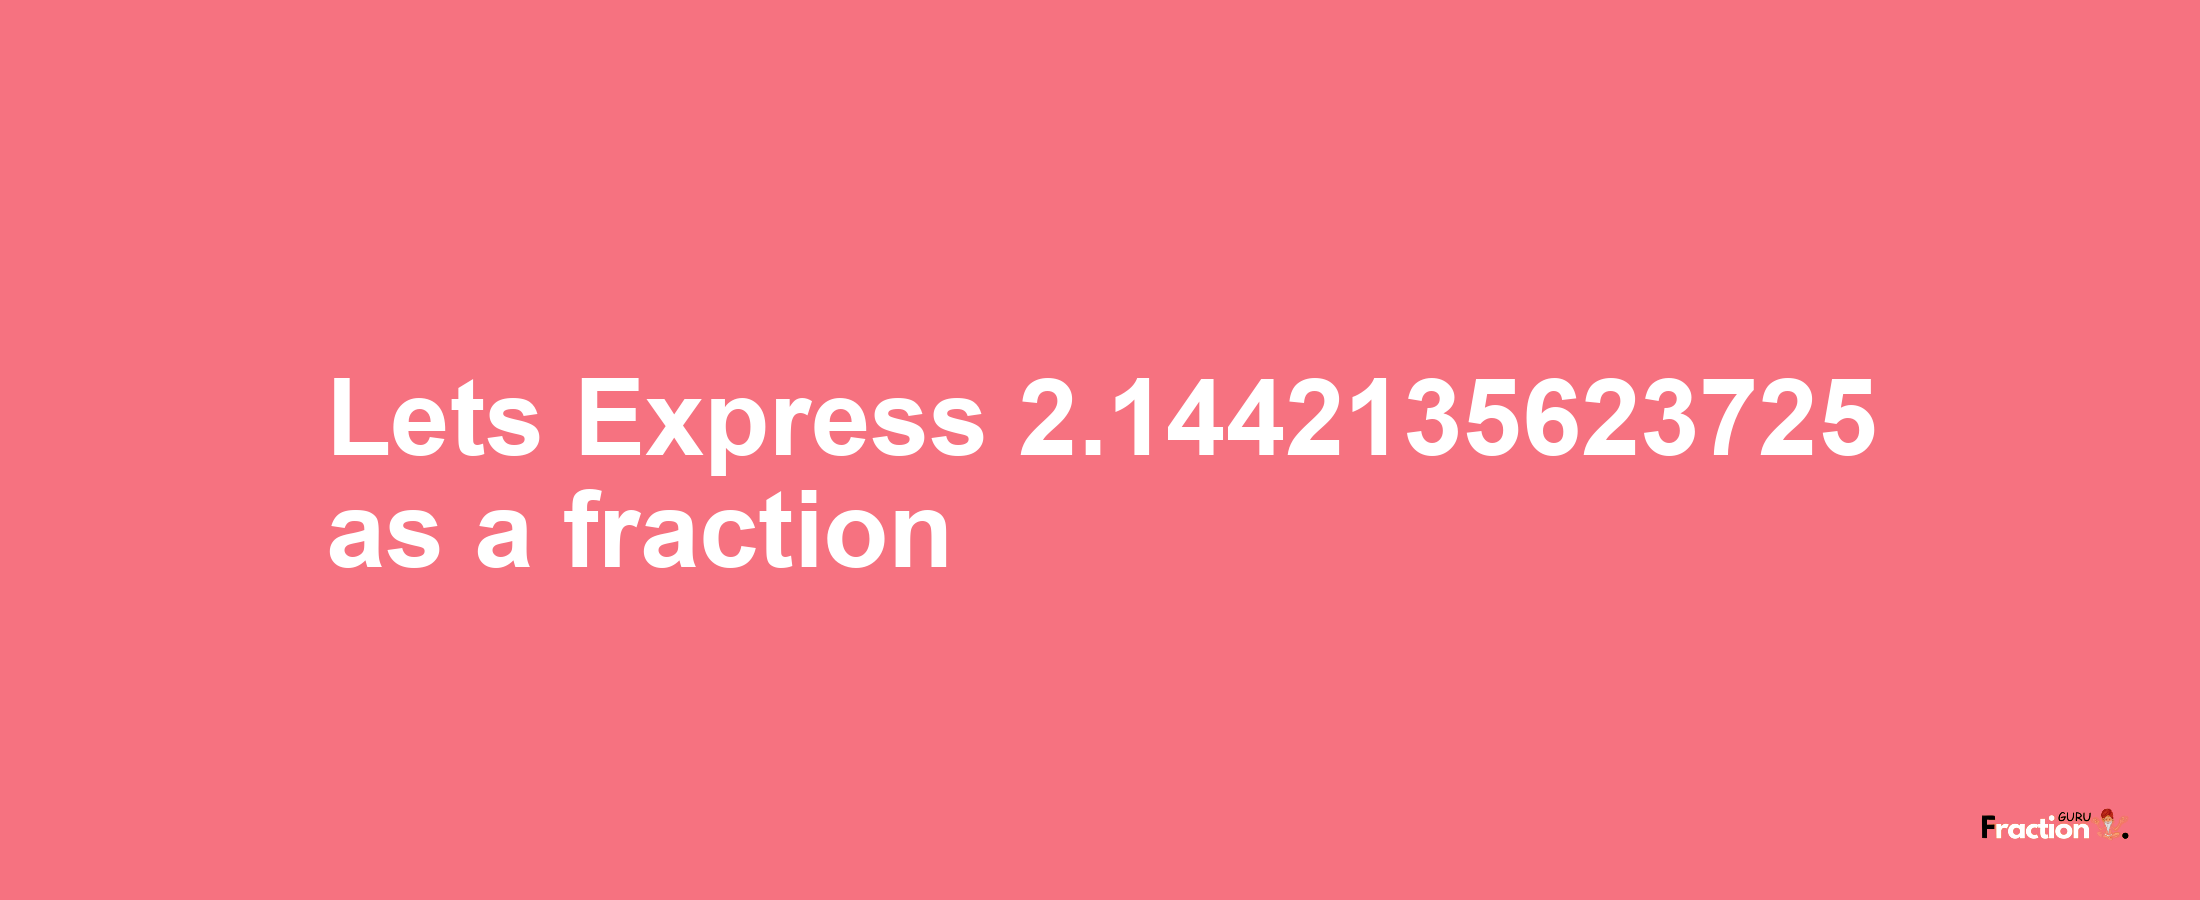 Lets Express 2.1442135623725 as afraction